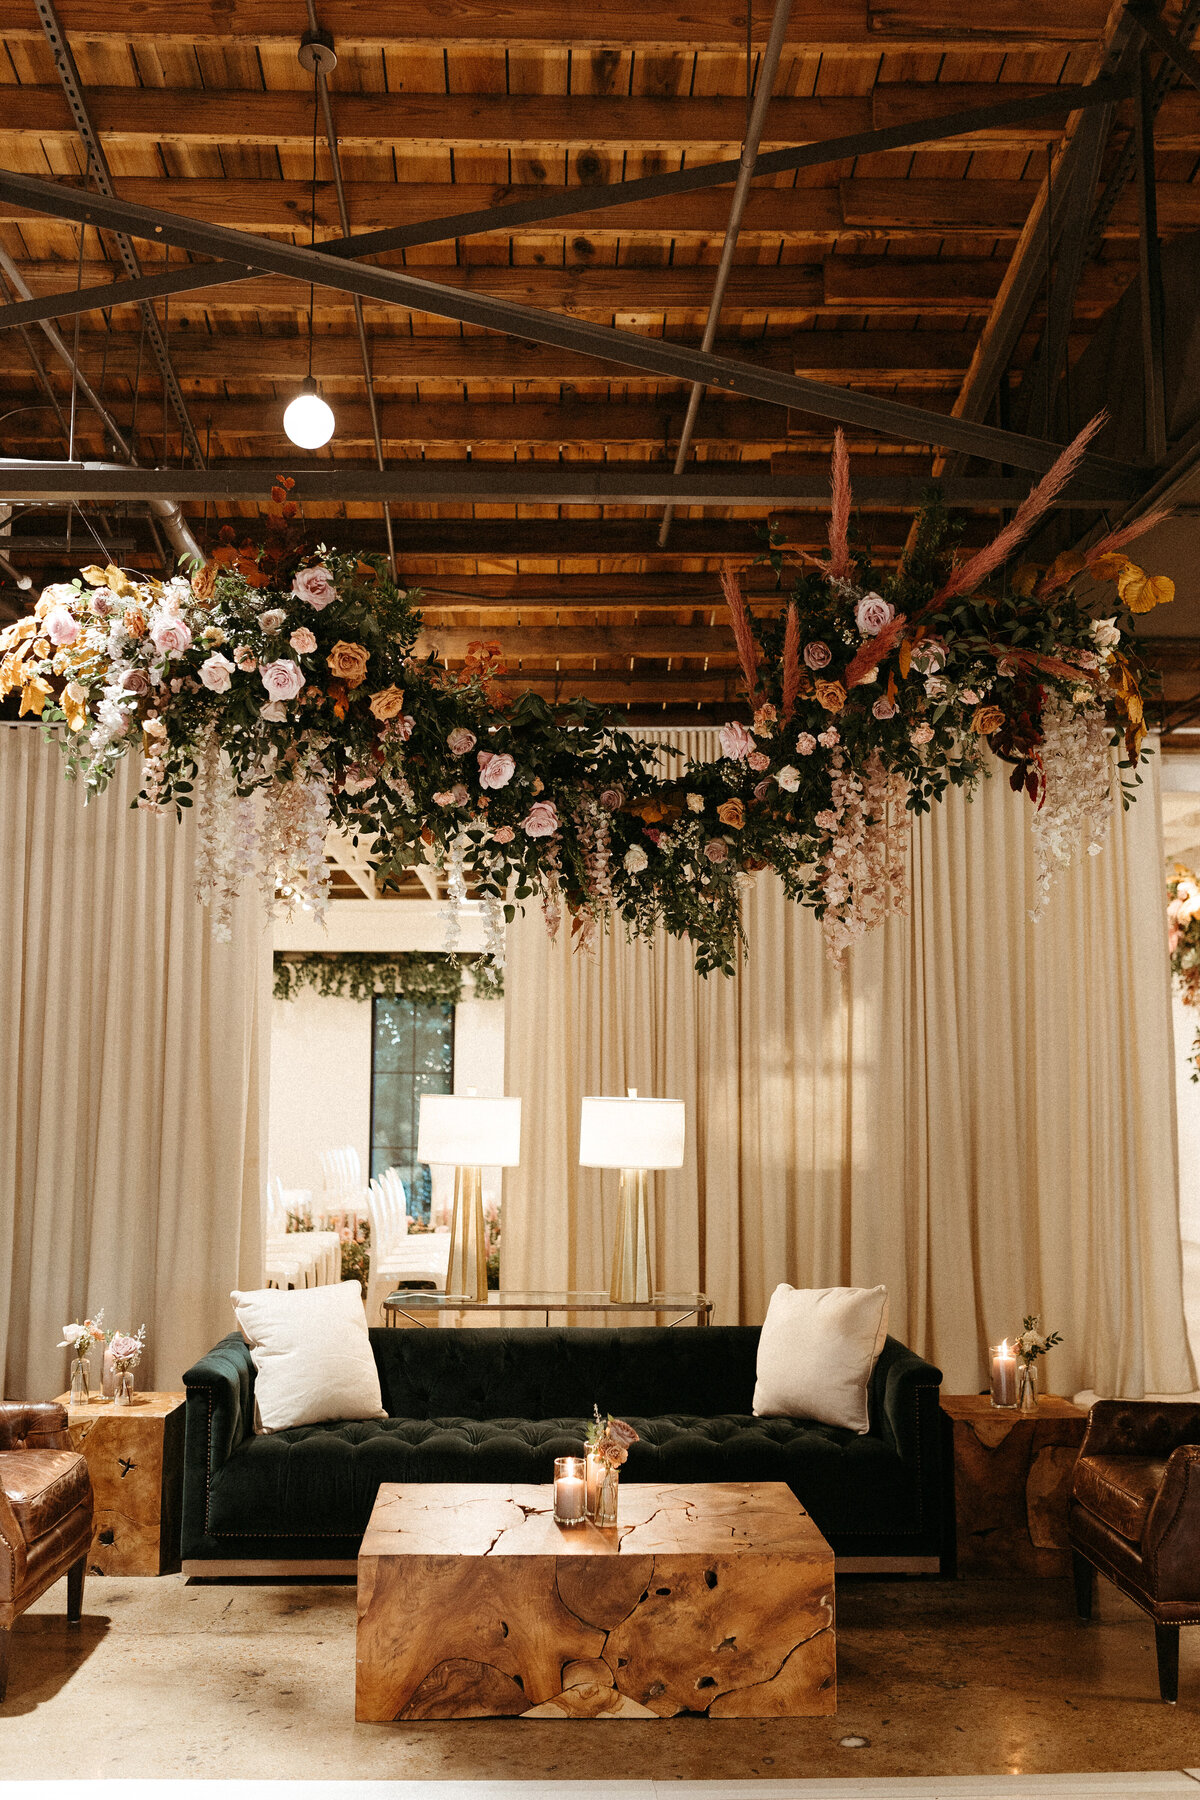 Stunning floral installations bring warmth to this Great Gatsby inspired wedding with florals of terra cotta, dusty pink, and burgundy hues. Petal heavy roses, copper beech, and pink pampas grass accents. Designed by Rosemary and Finch in Nashville, TN.